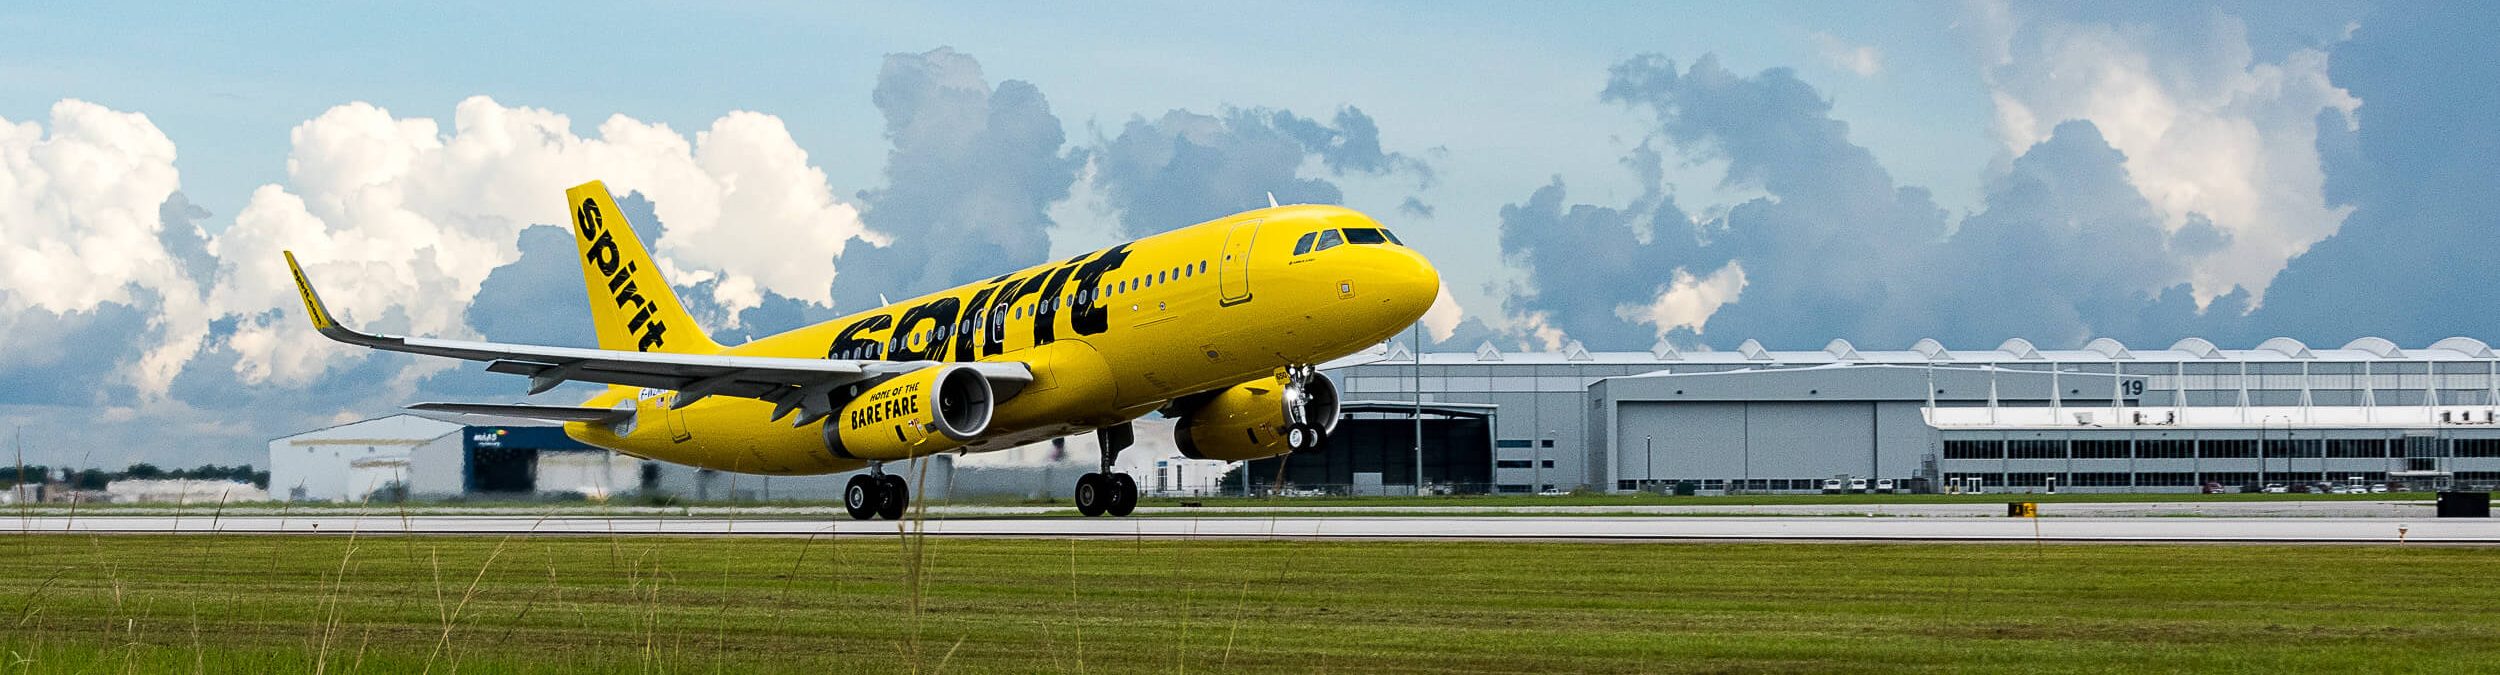 Temporary delays caused on Spirit Airlines flights after network outage